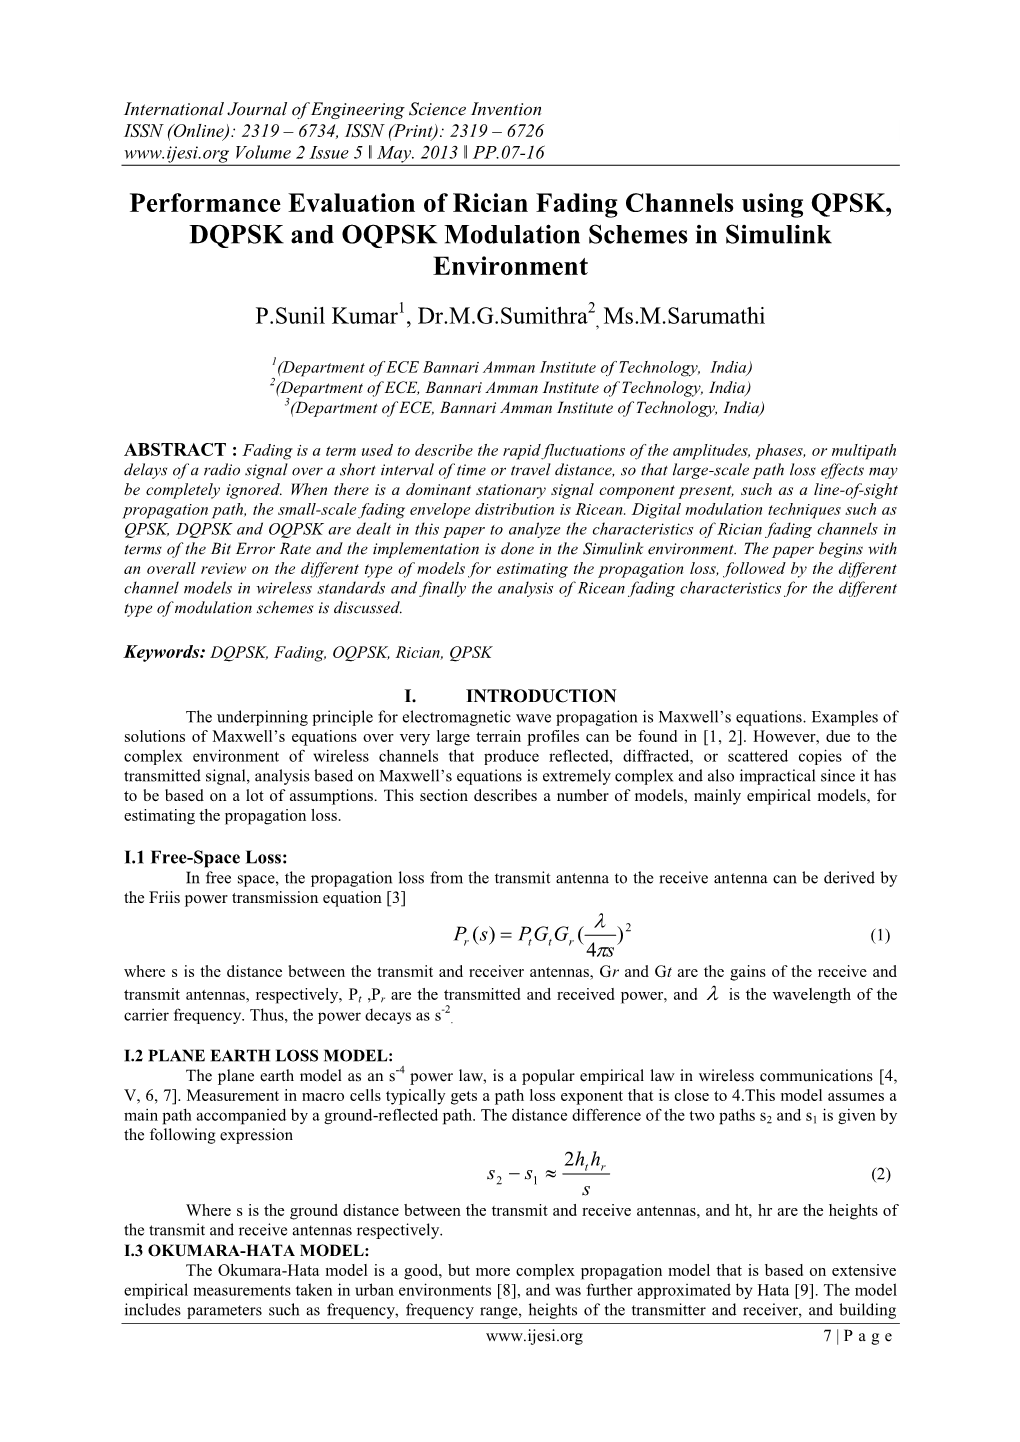 Performance Evaluation of Rician Fading Channels Using QPSK, DQPSK and OQPSK Modulation Schemes in Simulink Environment